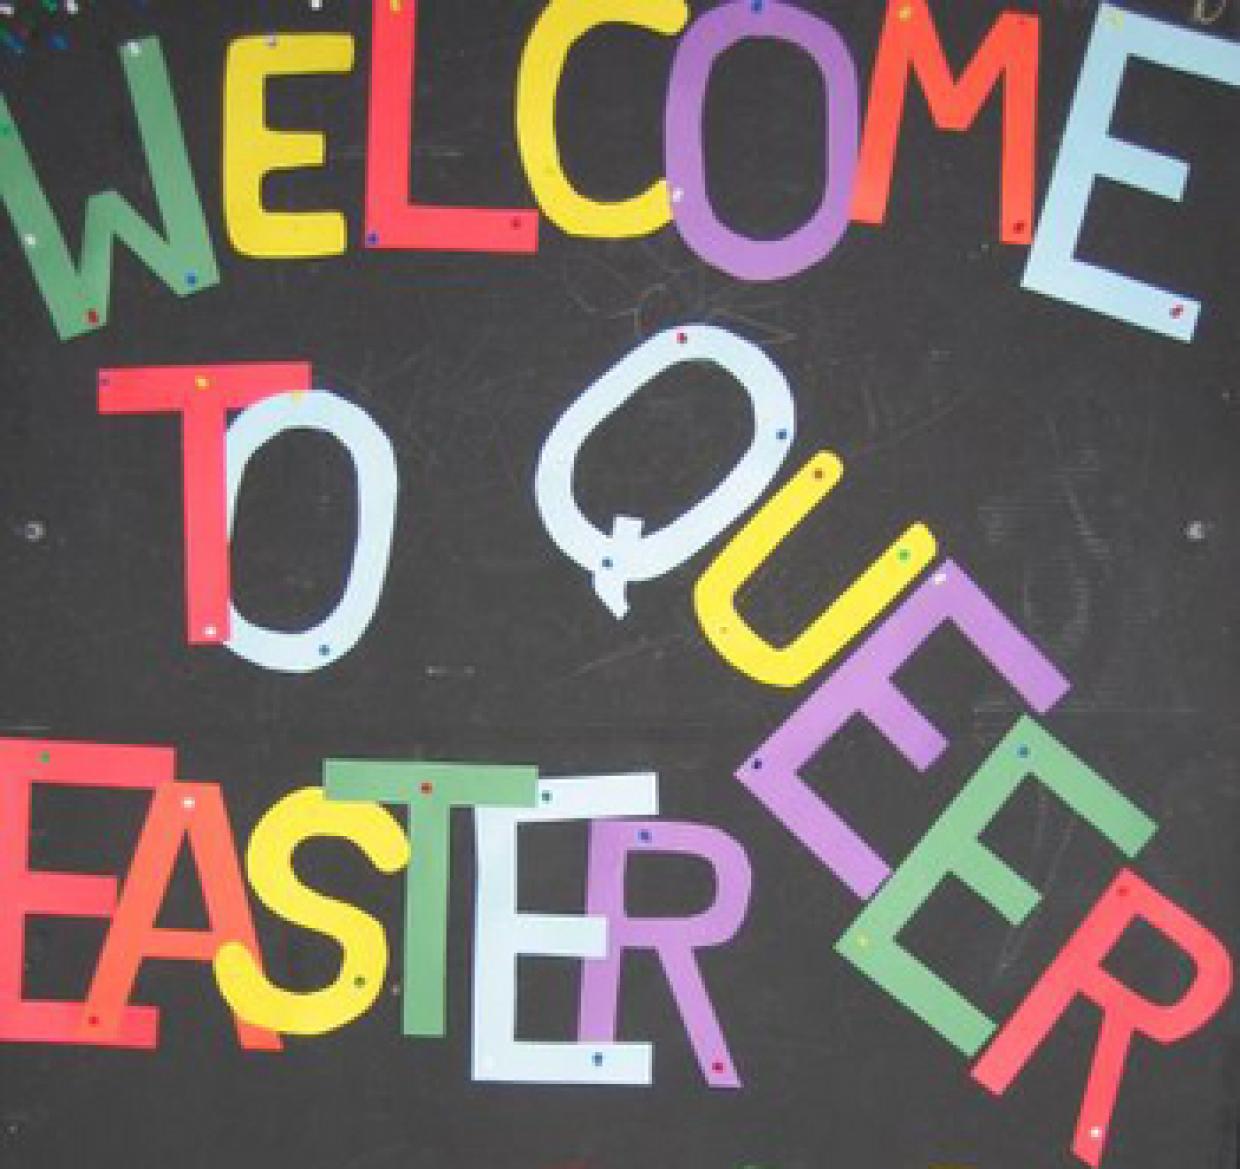 "Queer Easter 2008 - Education for Diversity and Inclusion"